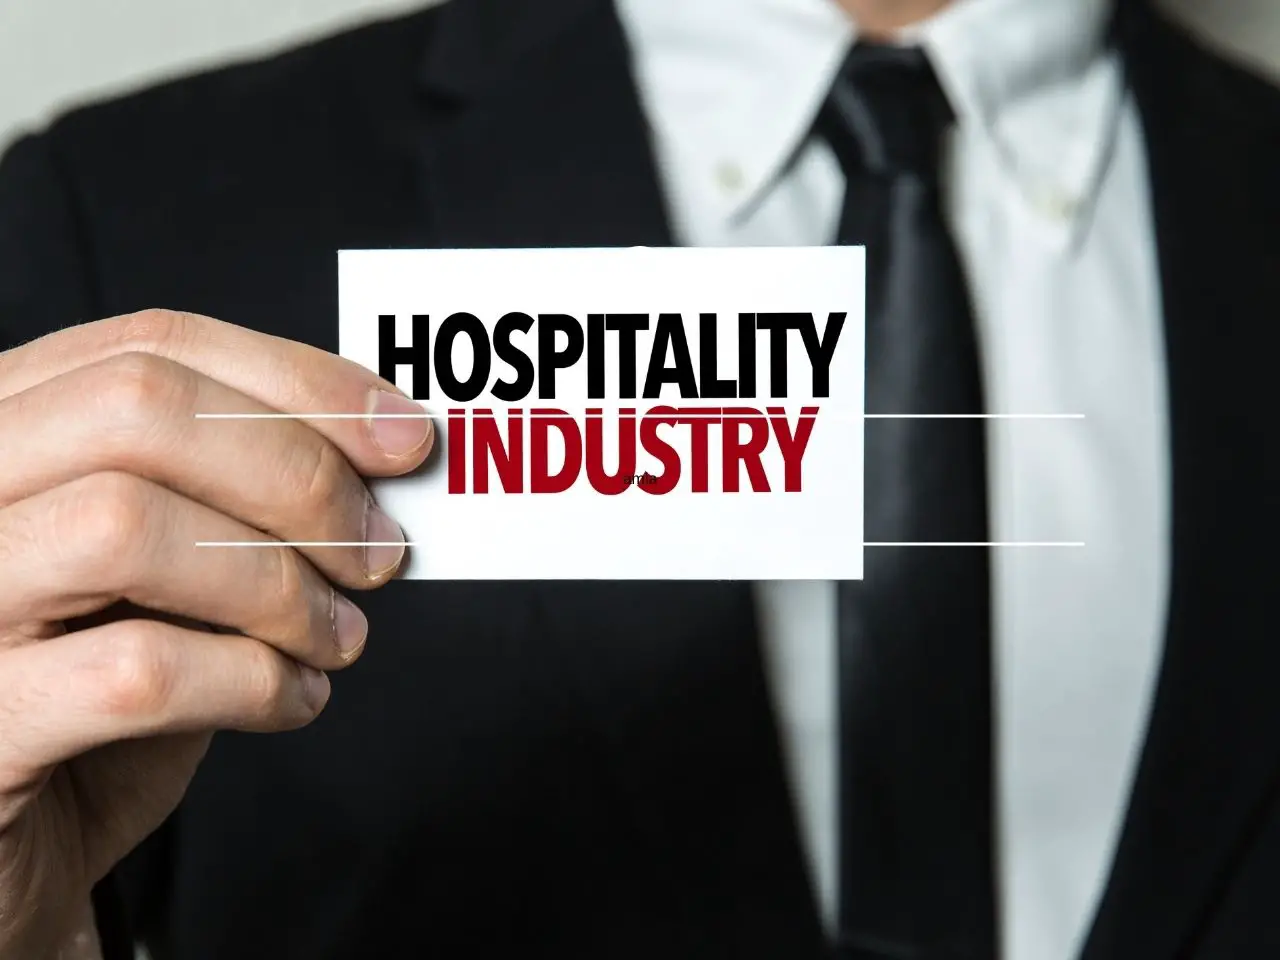 History of the hotel or hospitality industry